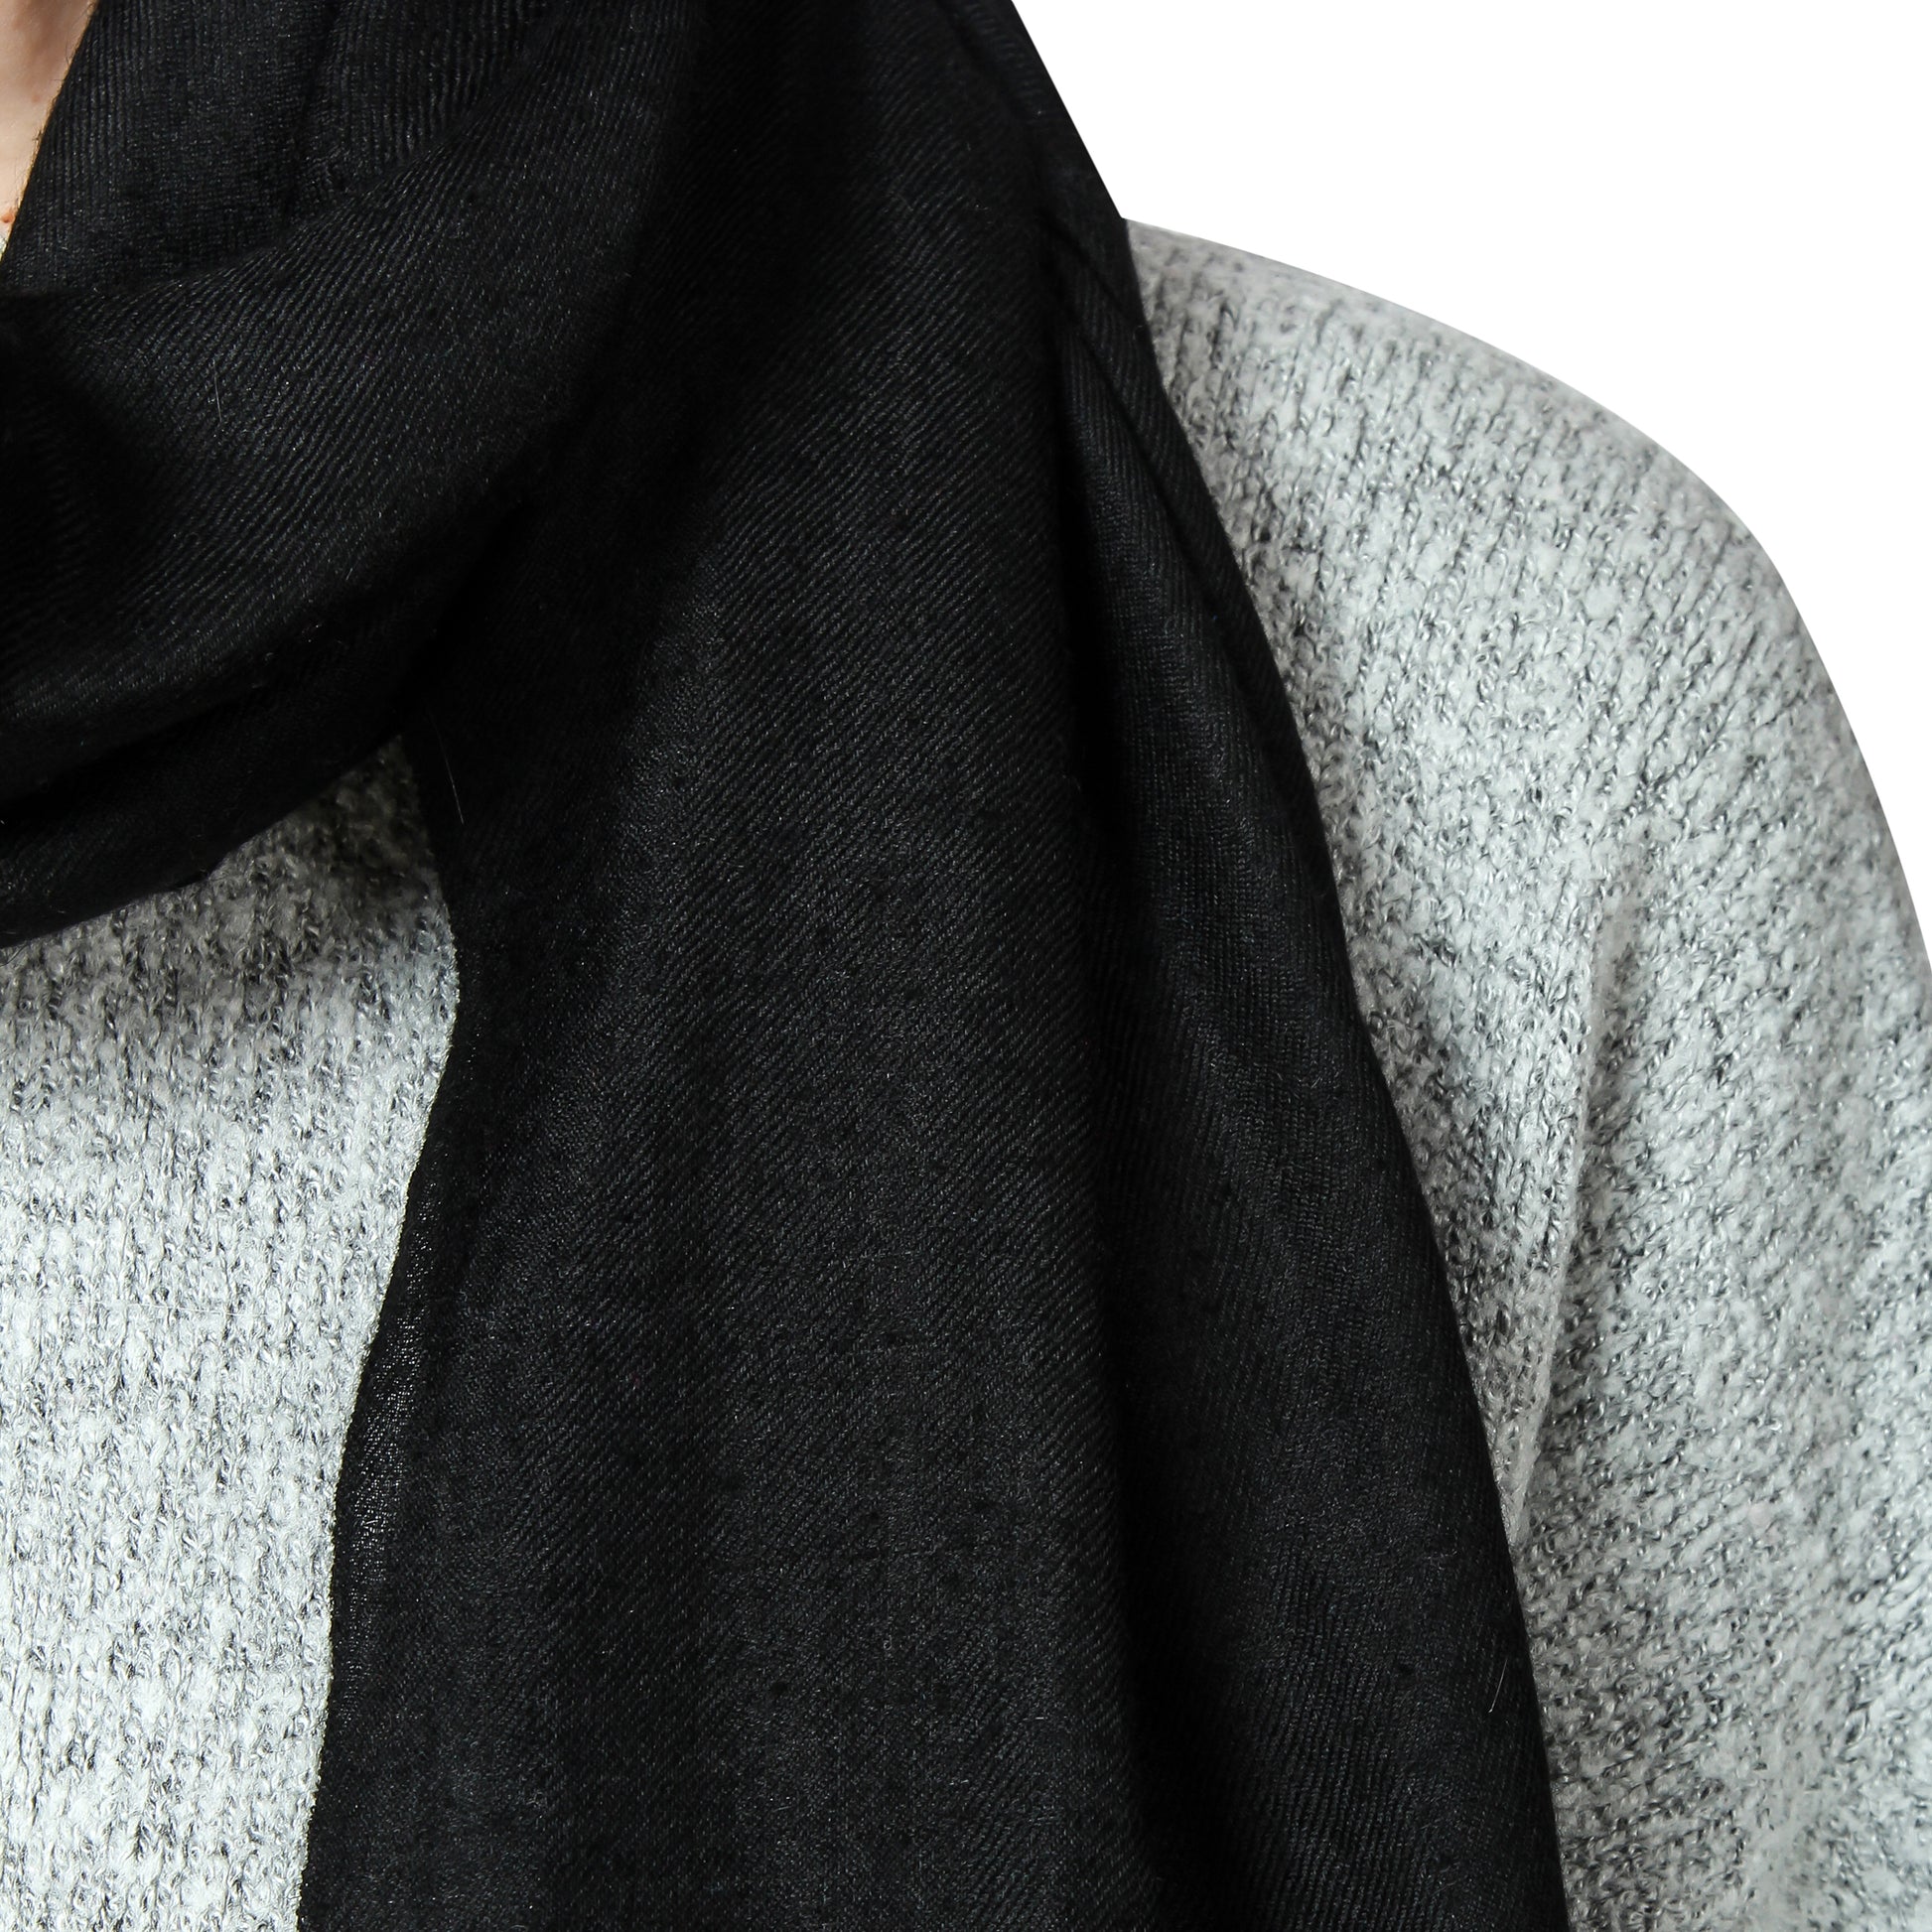 Close-up image of a black cashmere scarf, showing the intricate details of its soft and luxurious texture. The scarf appears to be made with high-quality material, and the black color adds to its classic and timeless style. The image focuses on the texture and appearance of the scarf, with no other elements in the frame.